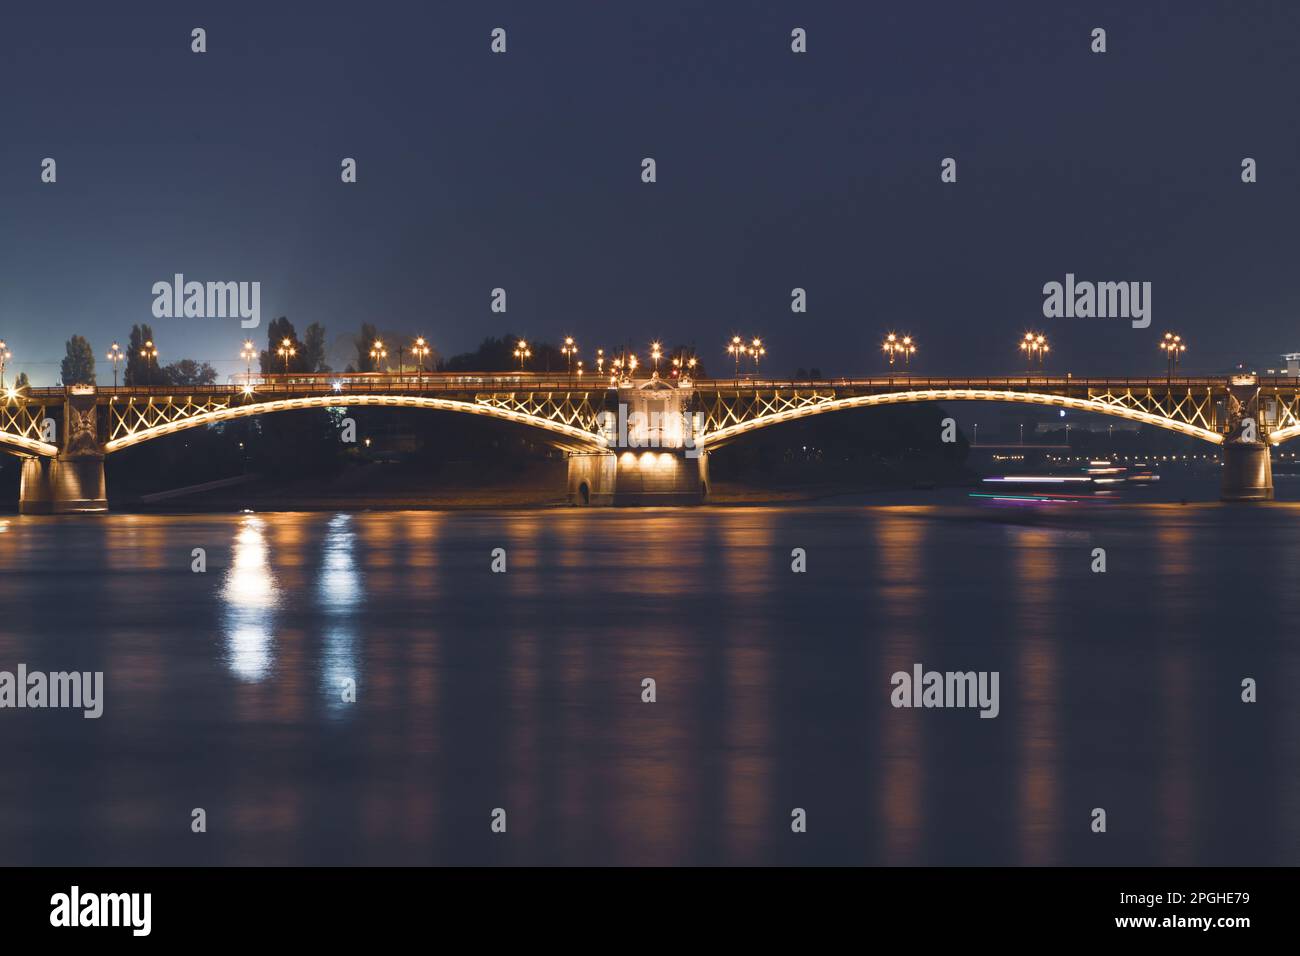 Picture of the Margaret bridge at night in Budapest, Hungary Stock Photo